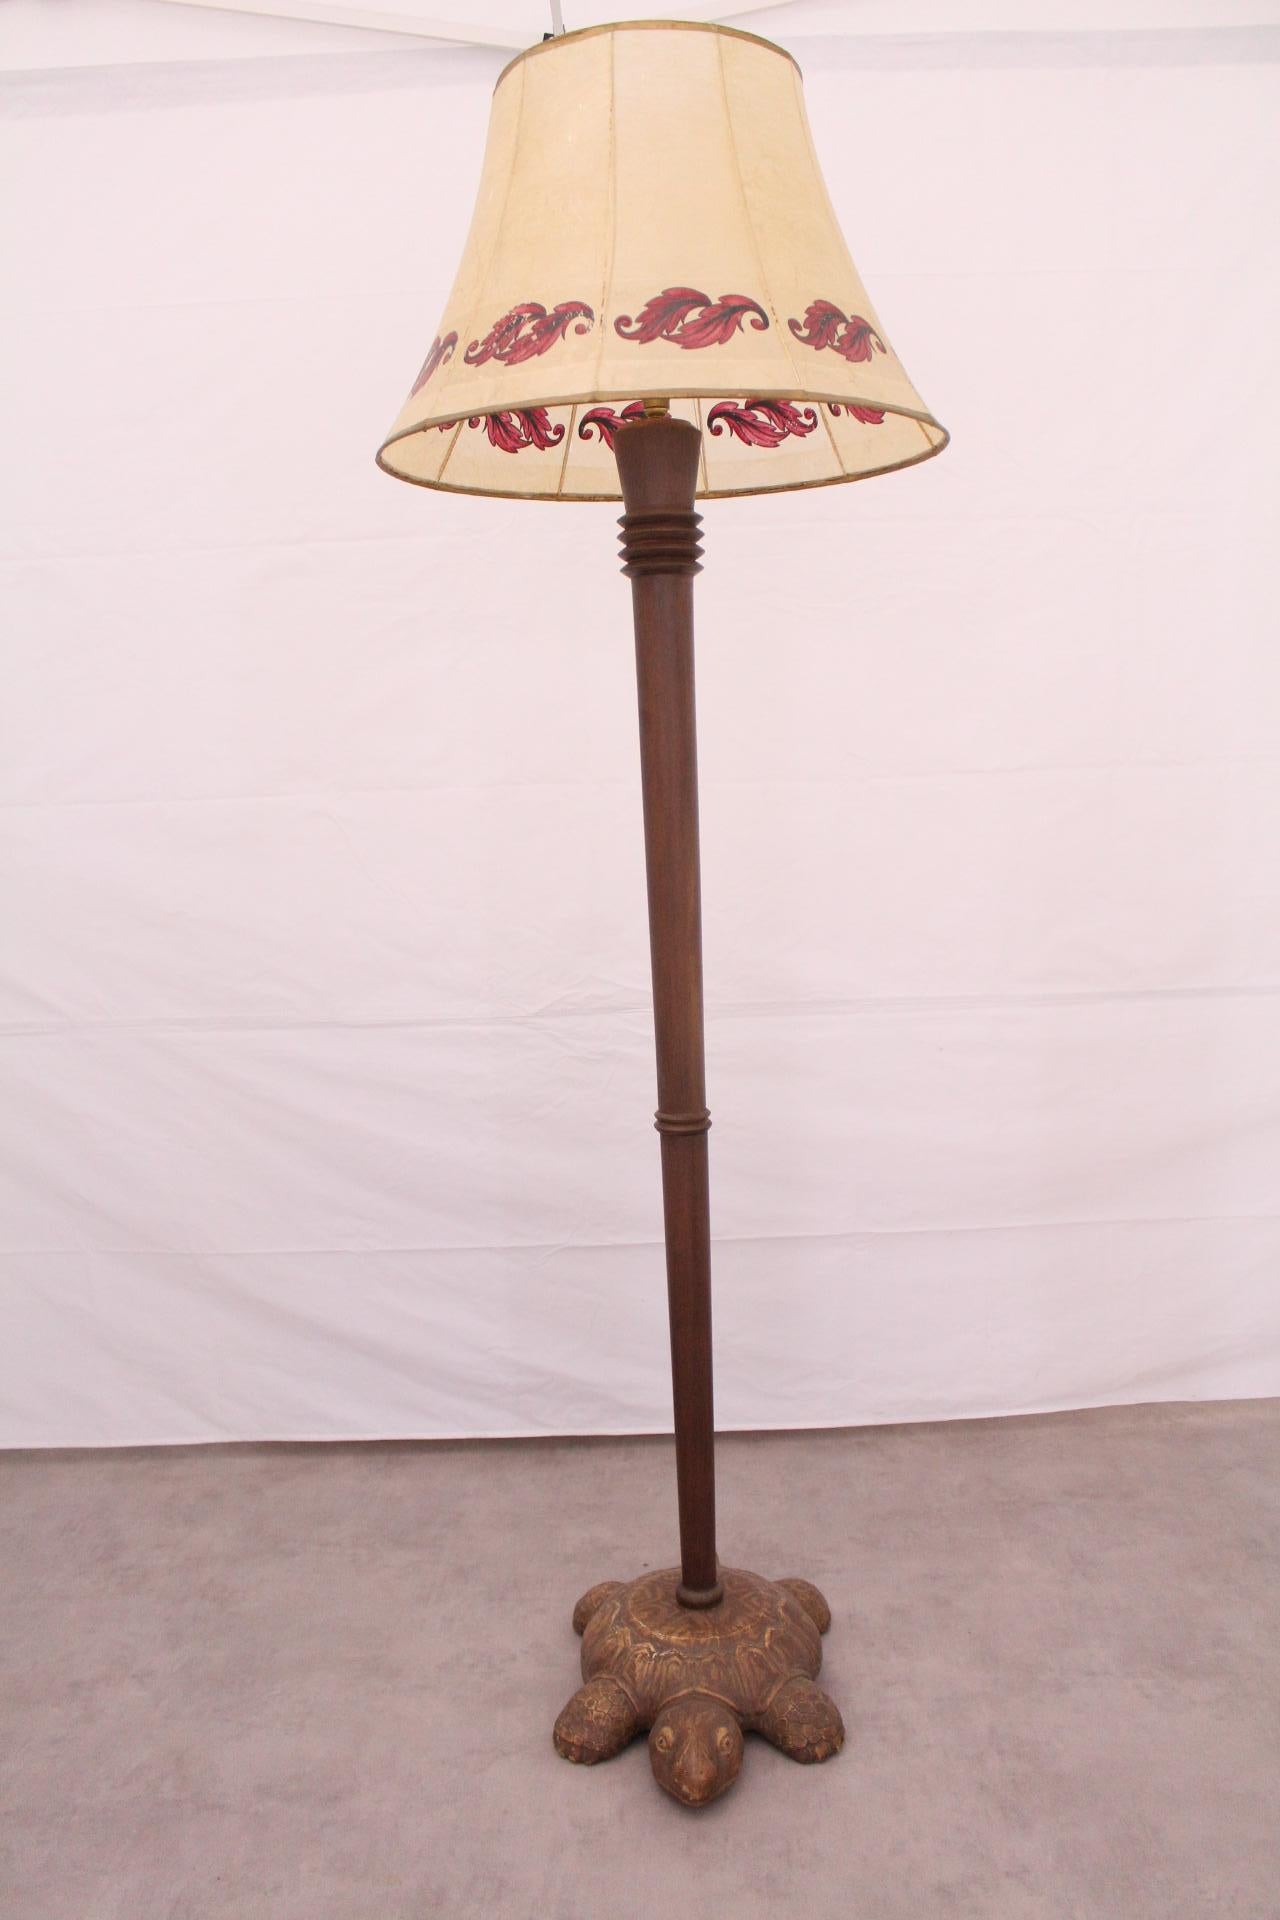 midcentury floor Lamp with Tortoise base circa 1930-1940
Turned Wood with carved wood Tortoise base
Unusual and decorative
Standard lamp
Very good condition 
Shade not included
This can be re-wired and tested to USA or UK and European